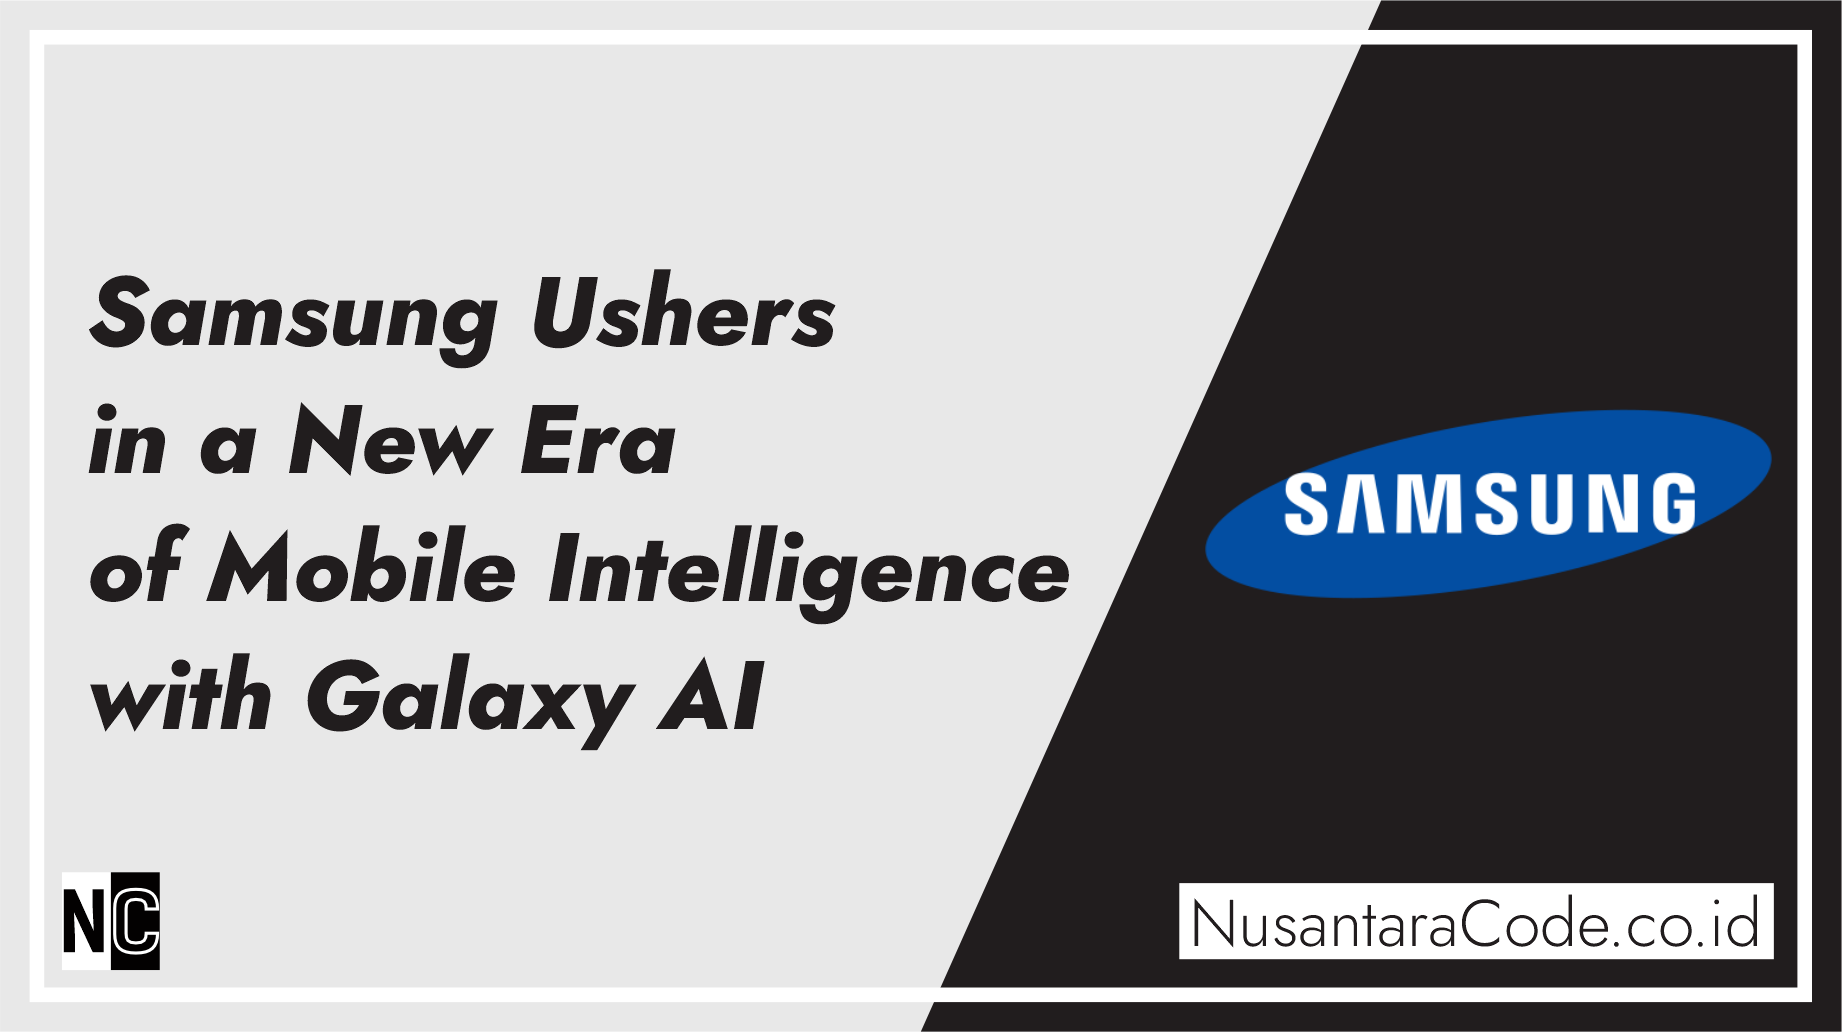 Samsung Ushers in a New Era of Mobile Intelligence with Galaxy AI